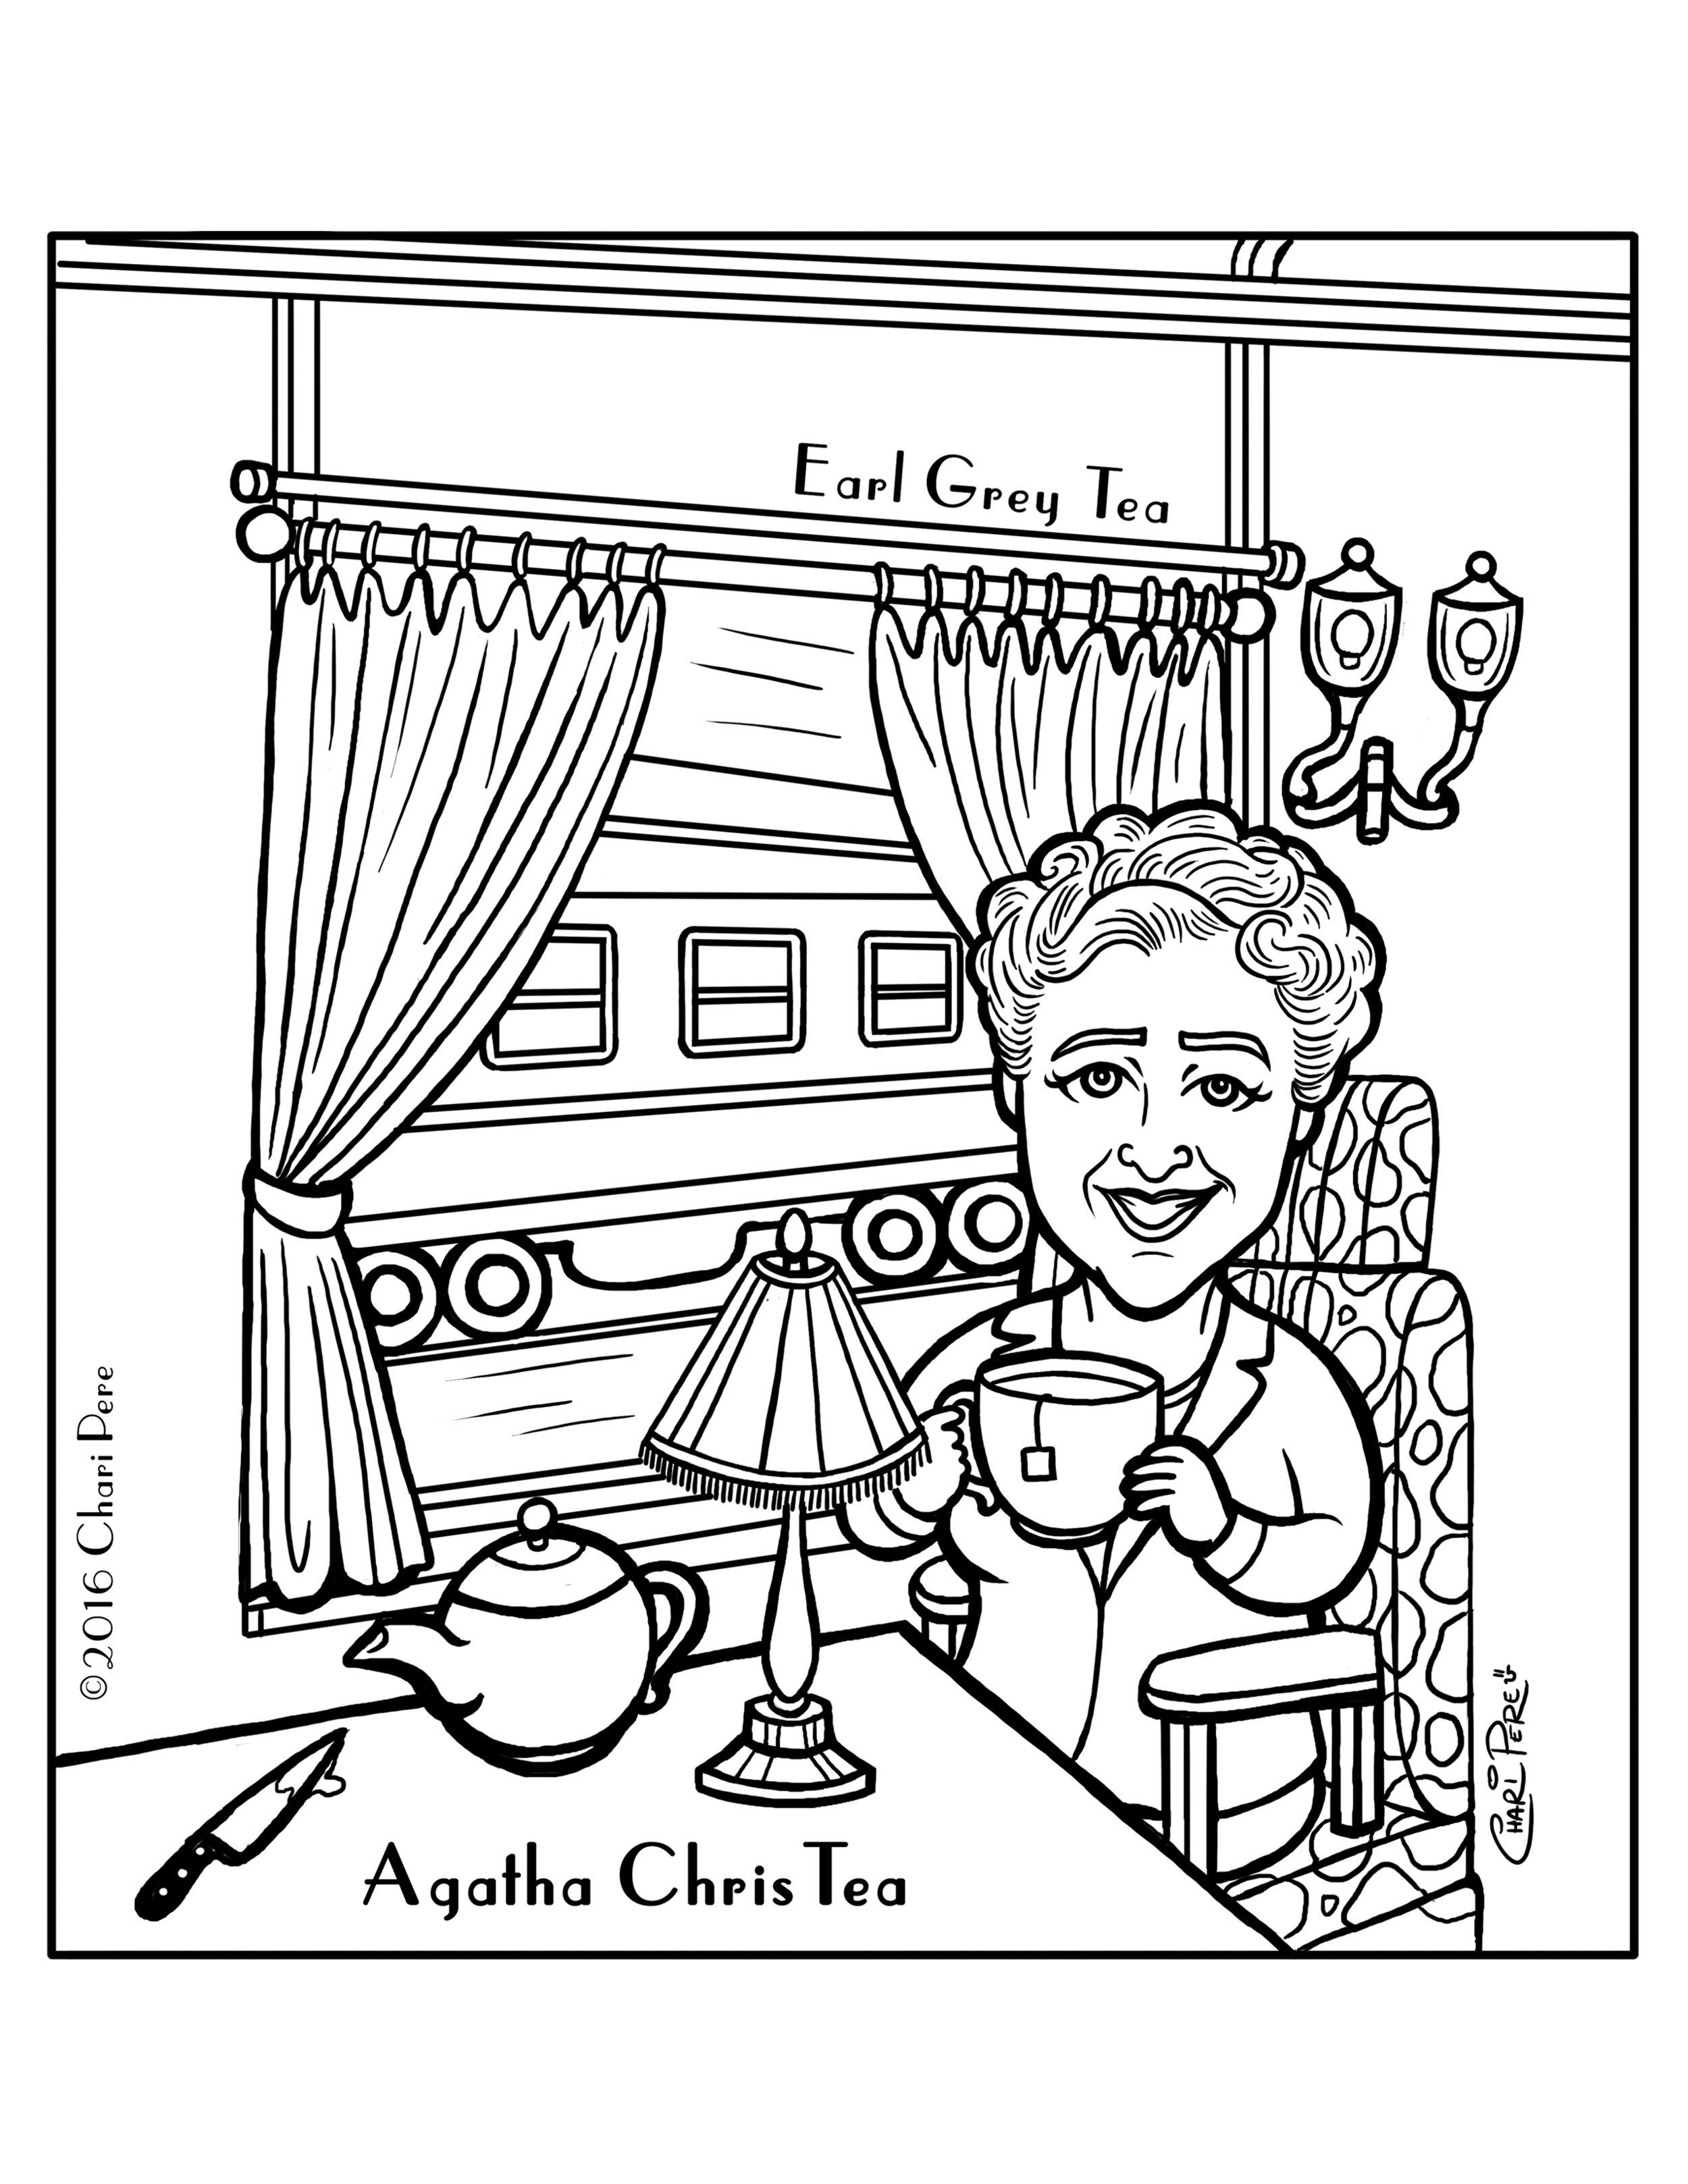 Agatha ChrisTea Coloring Page for The TeaBook